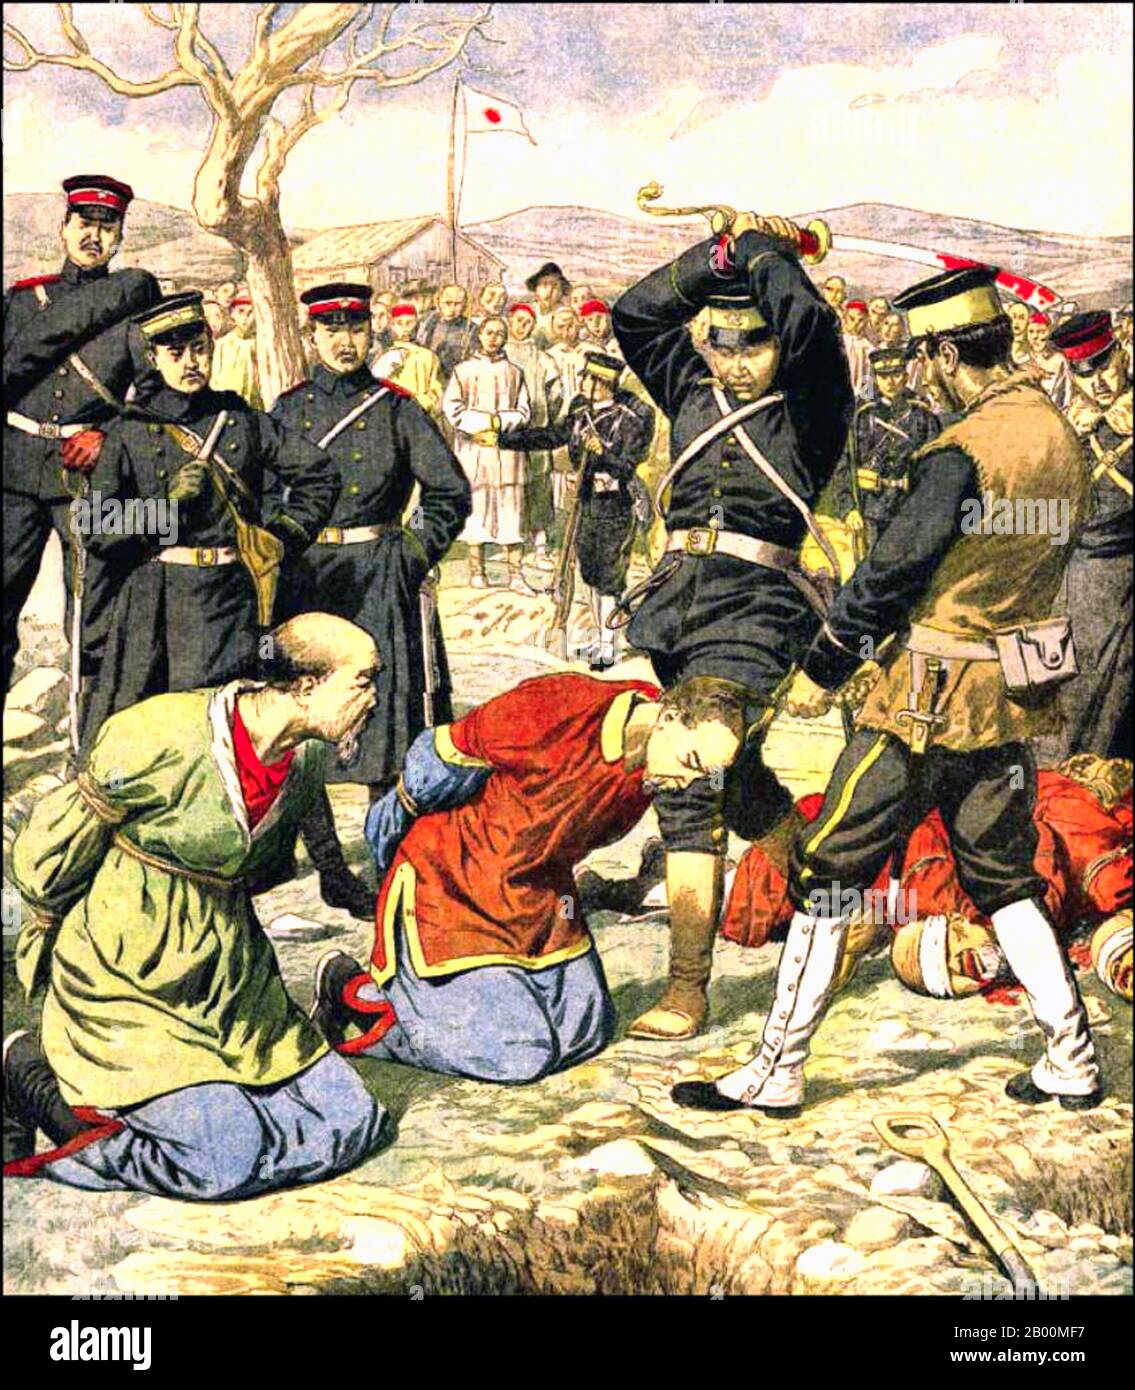 China: 'Japanese soldiers beheading Chinese citizens suspected of Russian sympathies near Mukden (Shenyang)'. Illustration fro Le Petit Journal, April 1905.  The Russo-Japanese War (8 February 1904 – 5 September 1905) was the first great war of the 20th century which grew out of the rival imperial ambitions of the Russian Empire and Japanese Empire over Manchuria and Korea. The resulting campaigns, in which the Japanese military attained victory over the Russian forces arrayed against them, were unexpected by world observers. Stock Photo